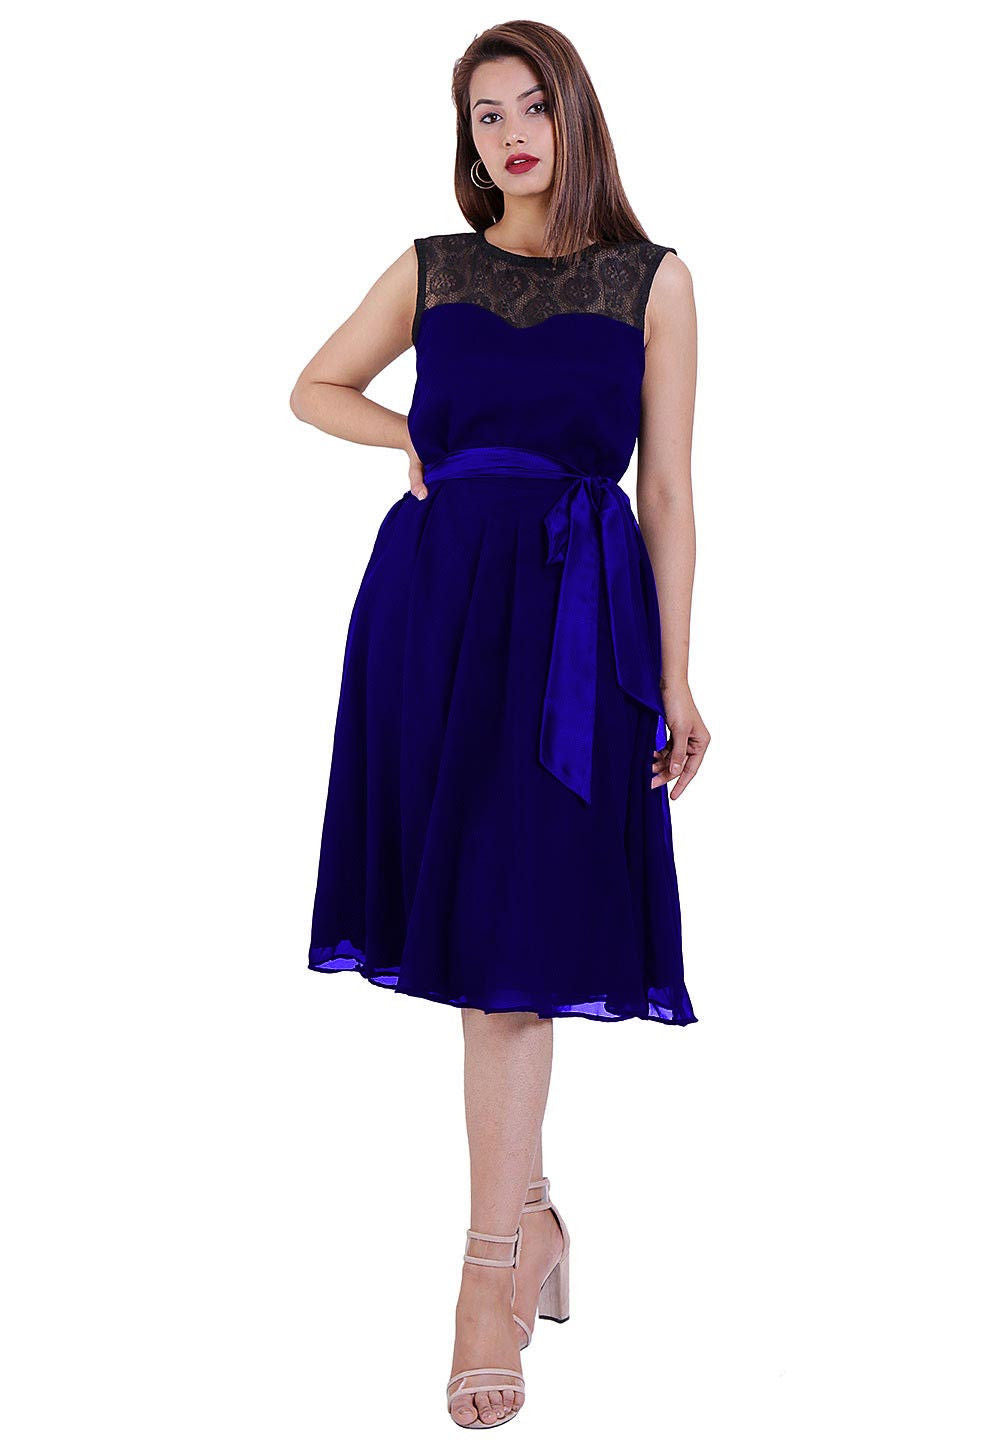 Woven Georgette Fit N Flare Dress in Royal Blue and Black